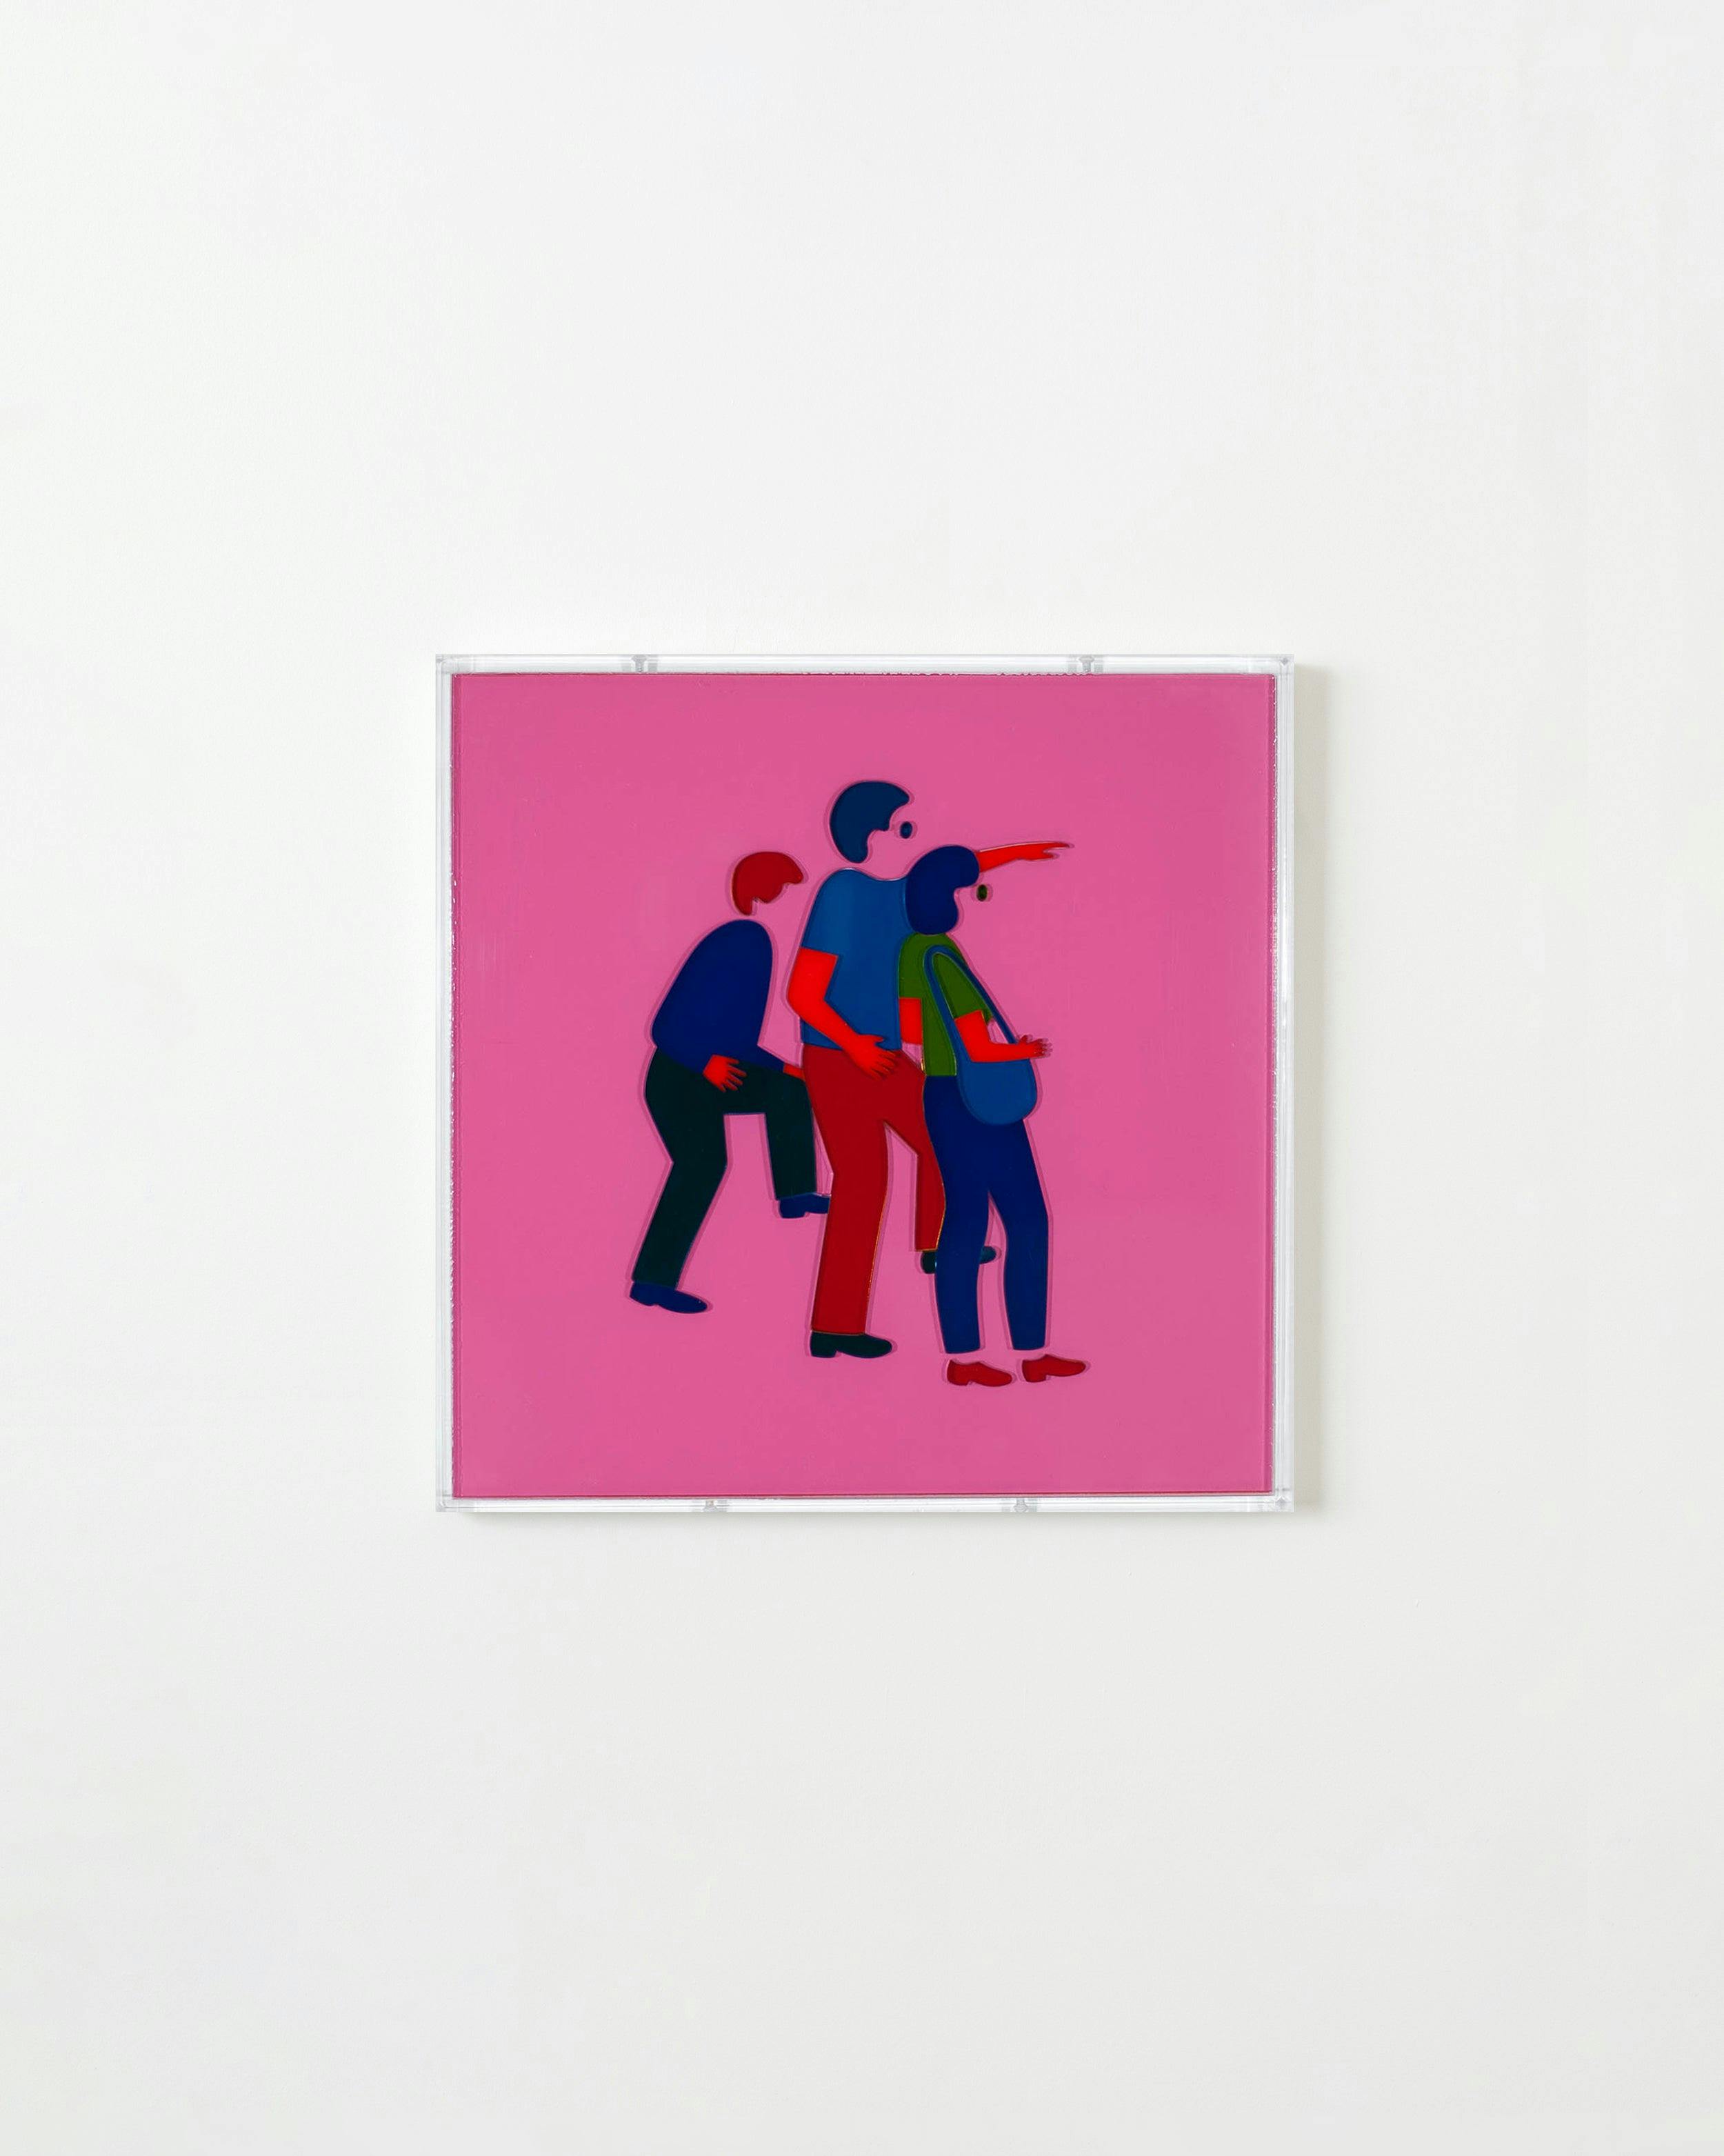 Mixed Media by Dana Bell titled "Three Tourists Point to the Right (Pink, Red, Green and Blue)".